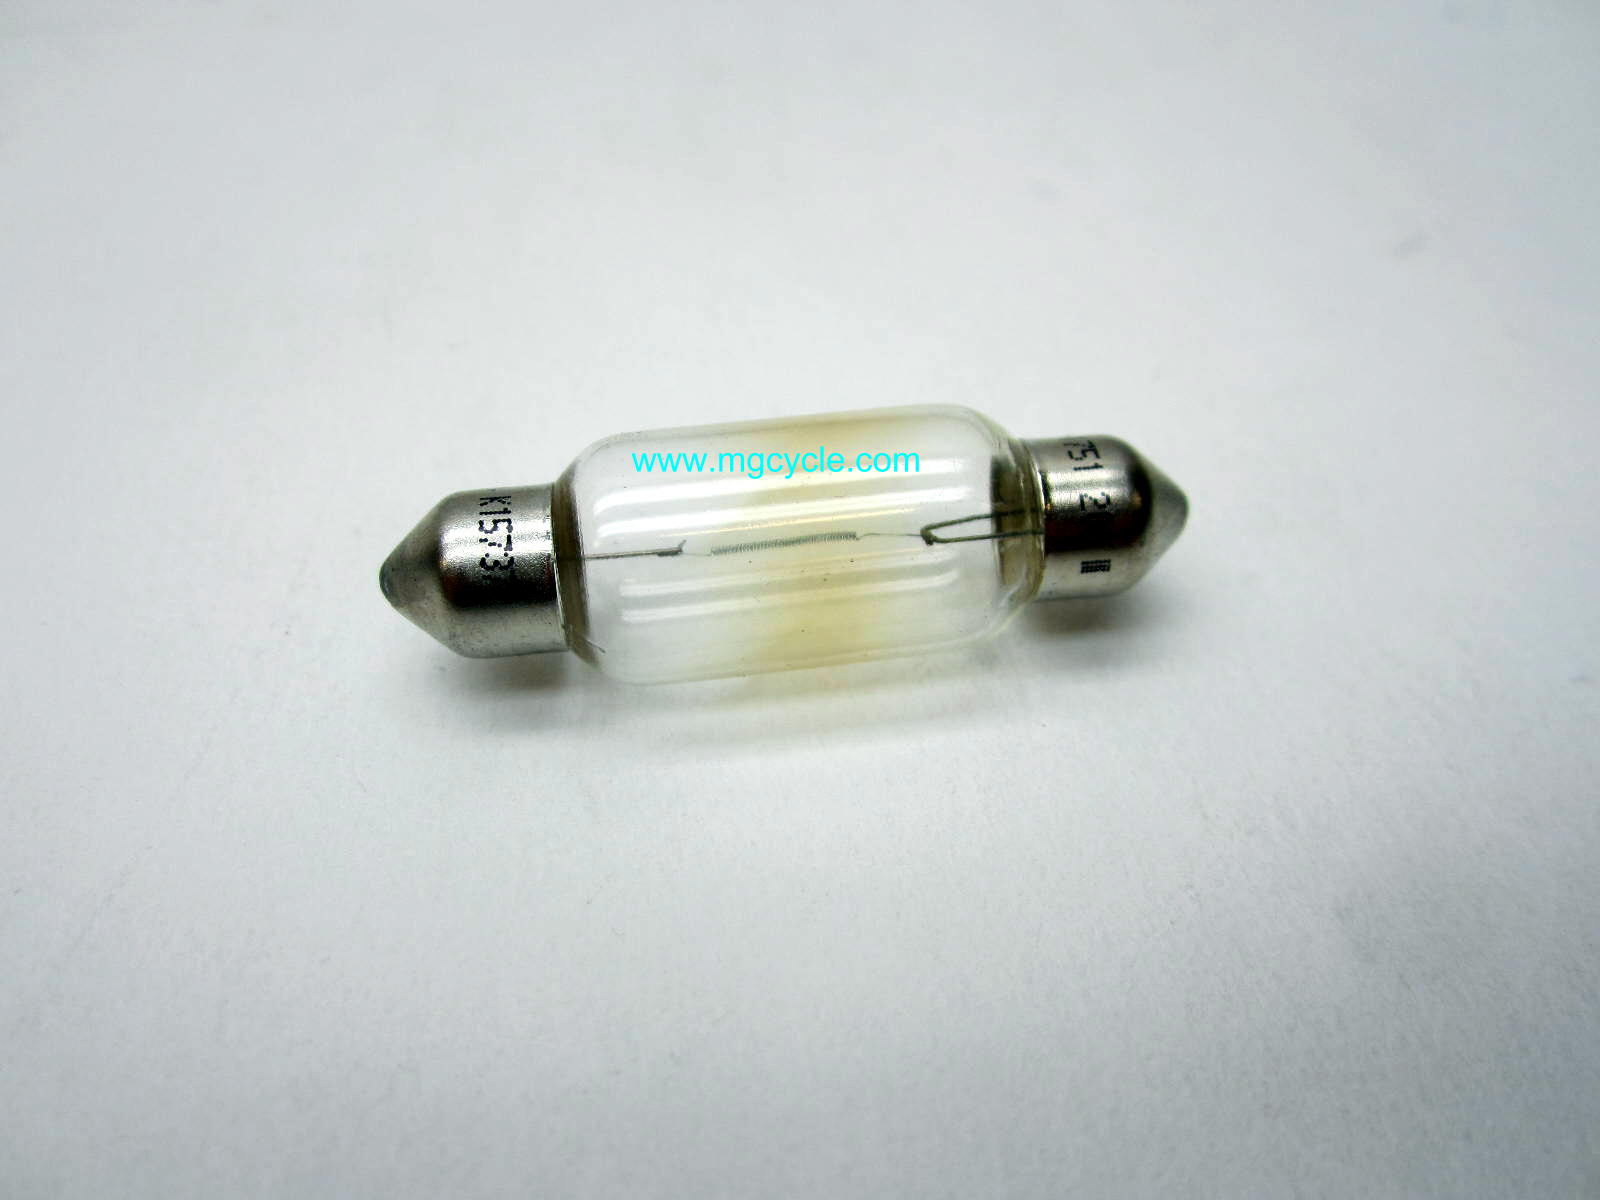 Bulb for Hella bar end turn signals - Click Image to Close